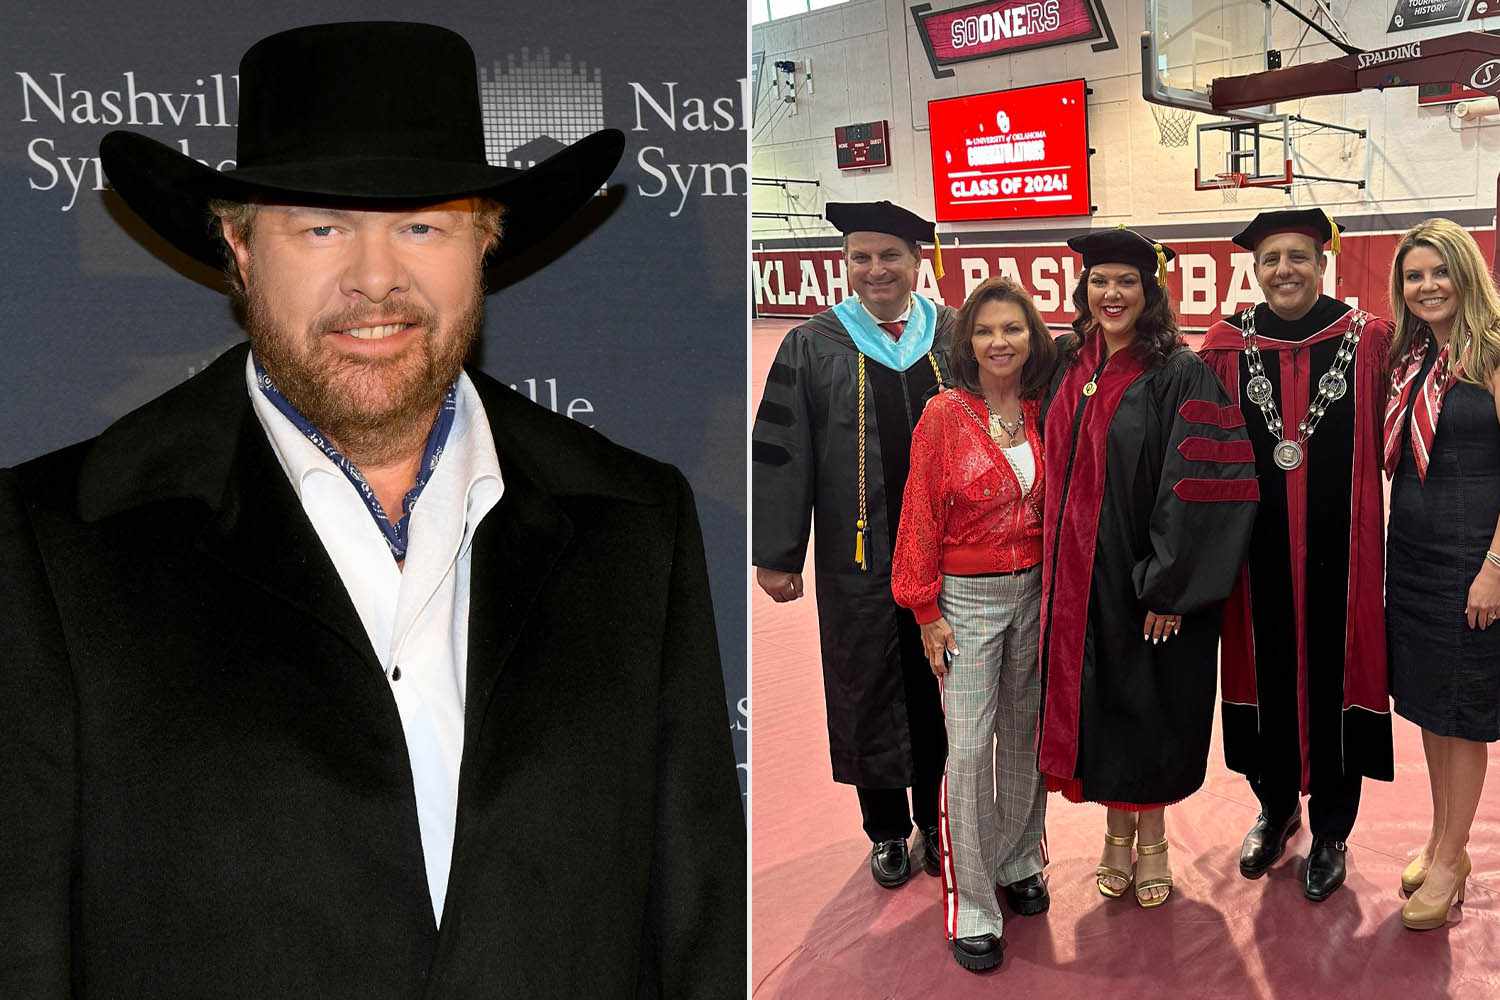 Toby Keith Honored with Posthumous University of Oklahoma Degree [Video]